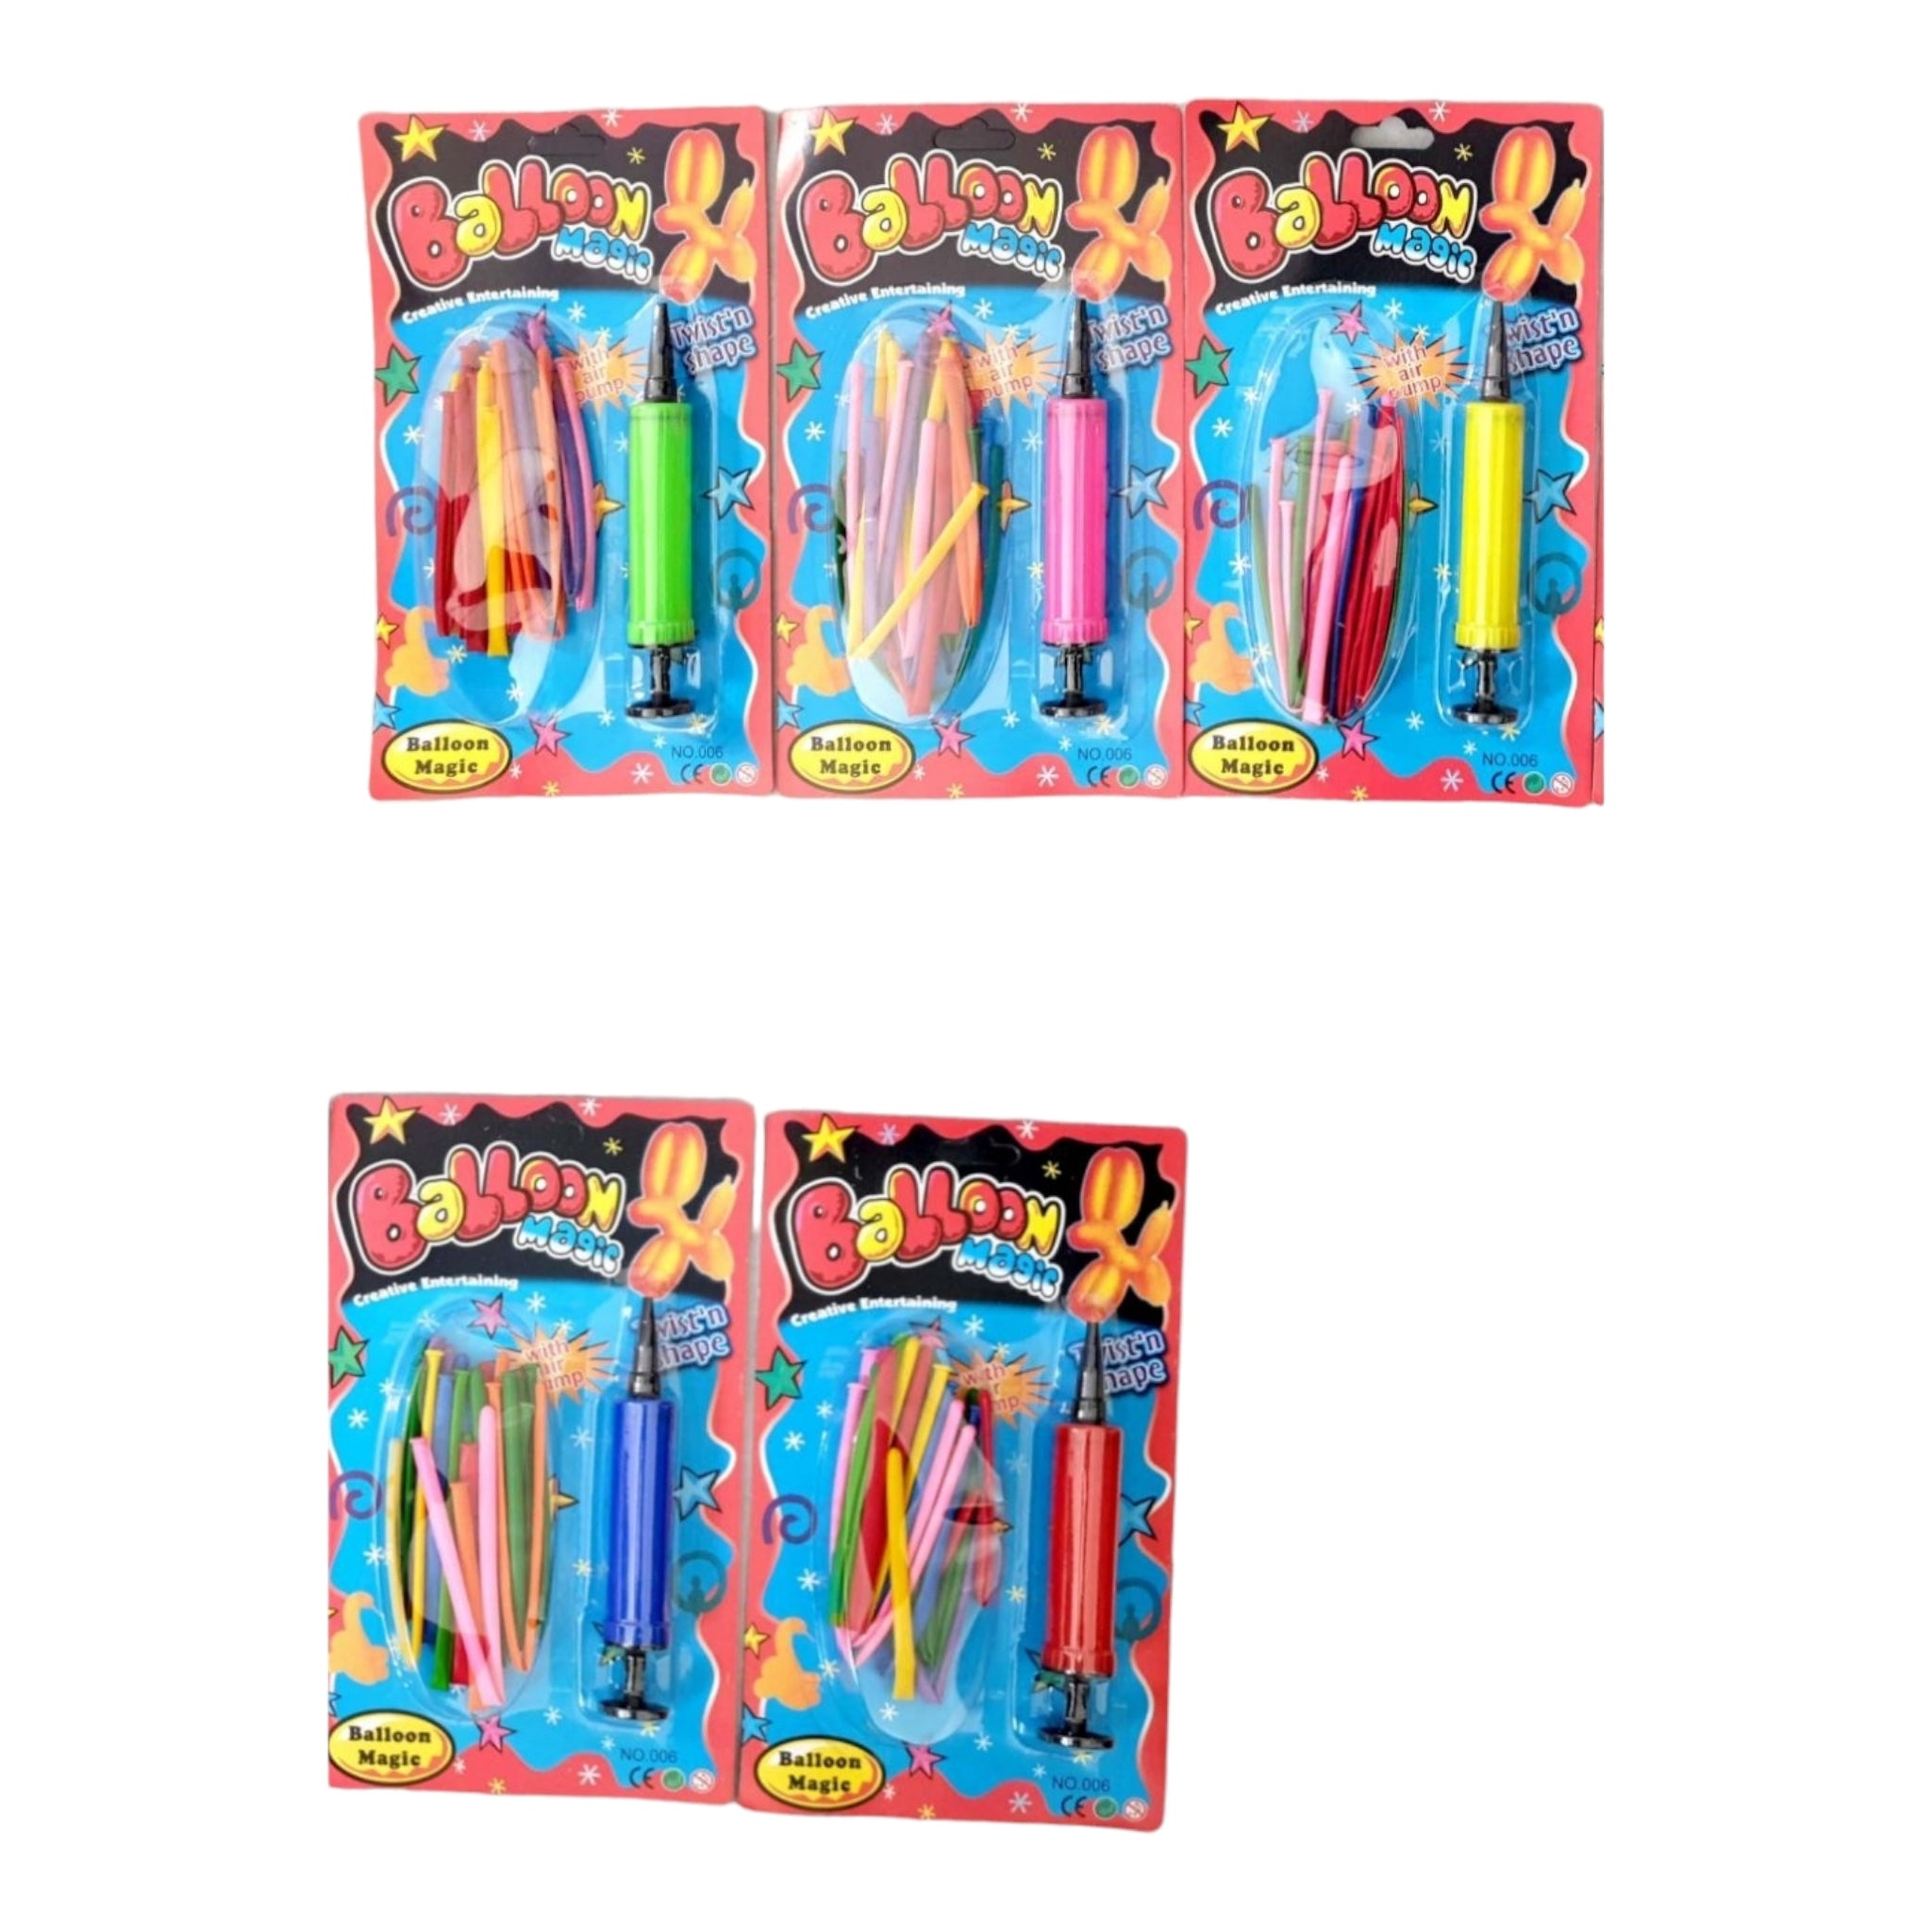 Magic Modeling Twisty Long Balloons 12pcs Tube Shaped with Hand Pump